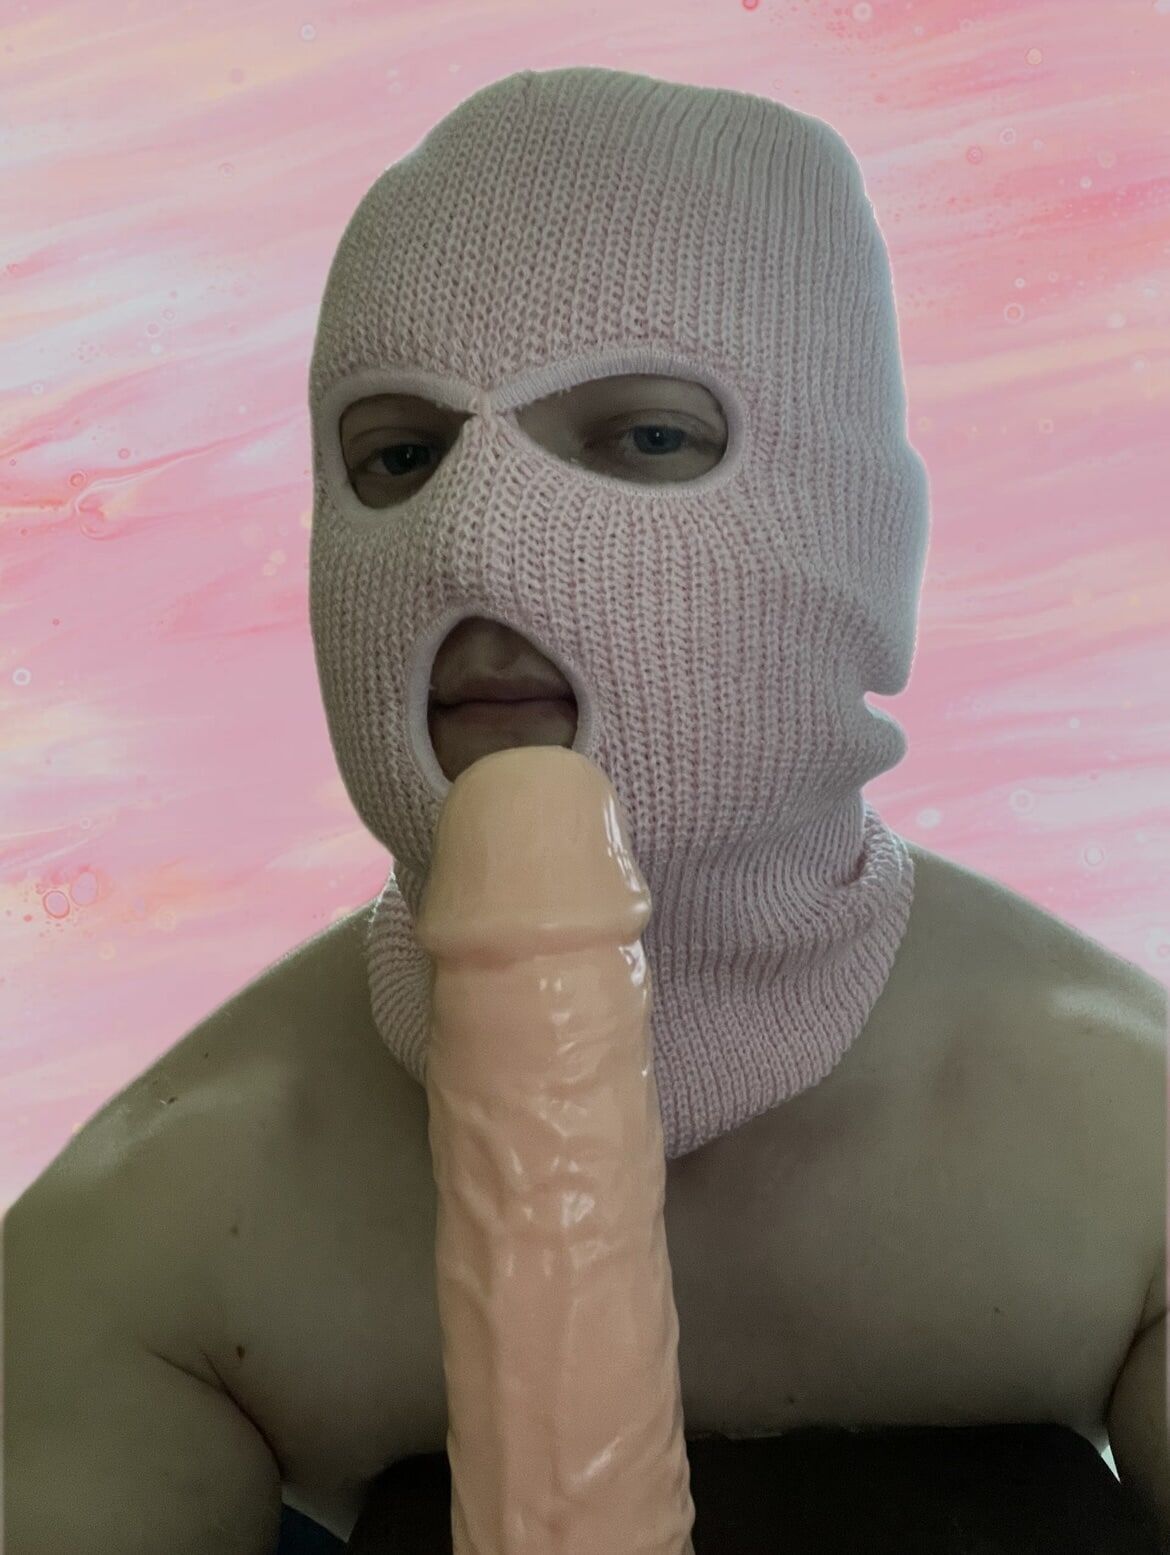 Playing with a dildo in a pink mask #5